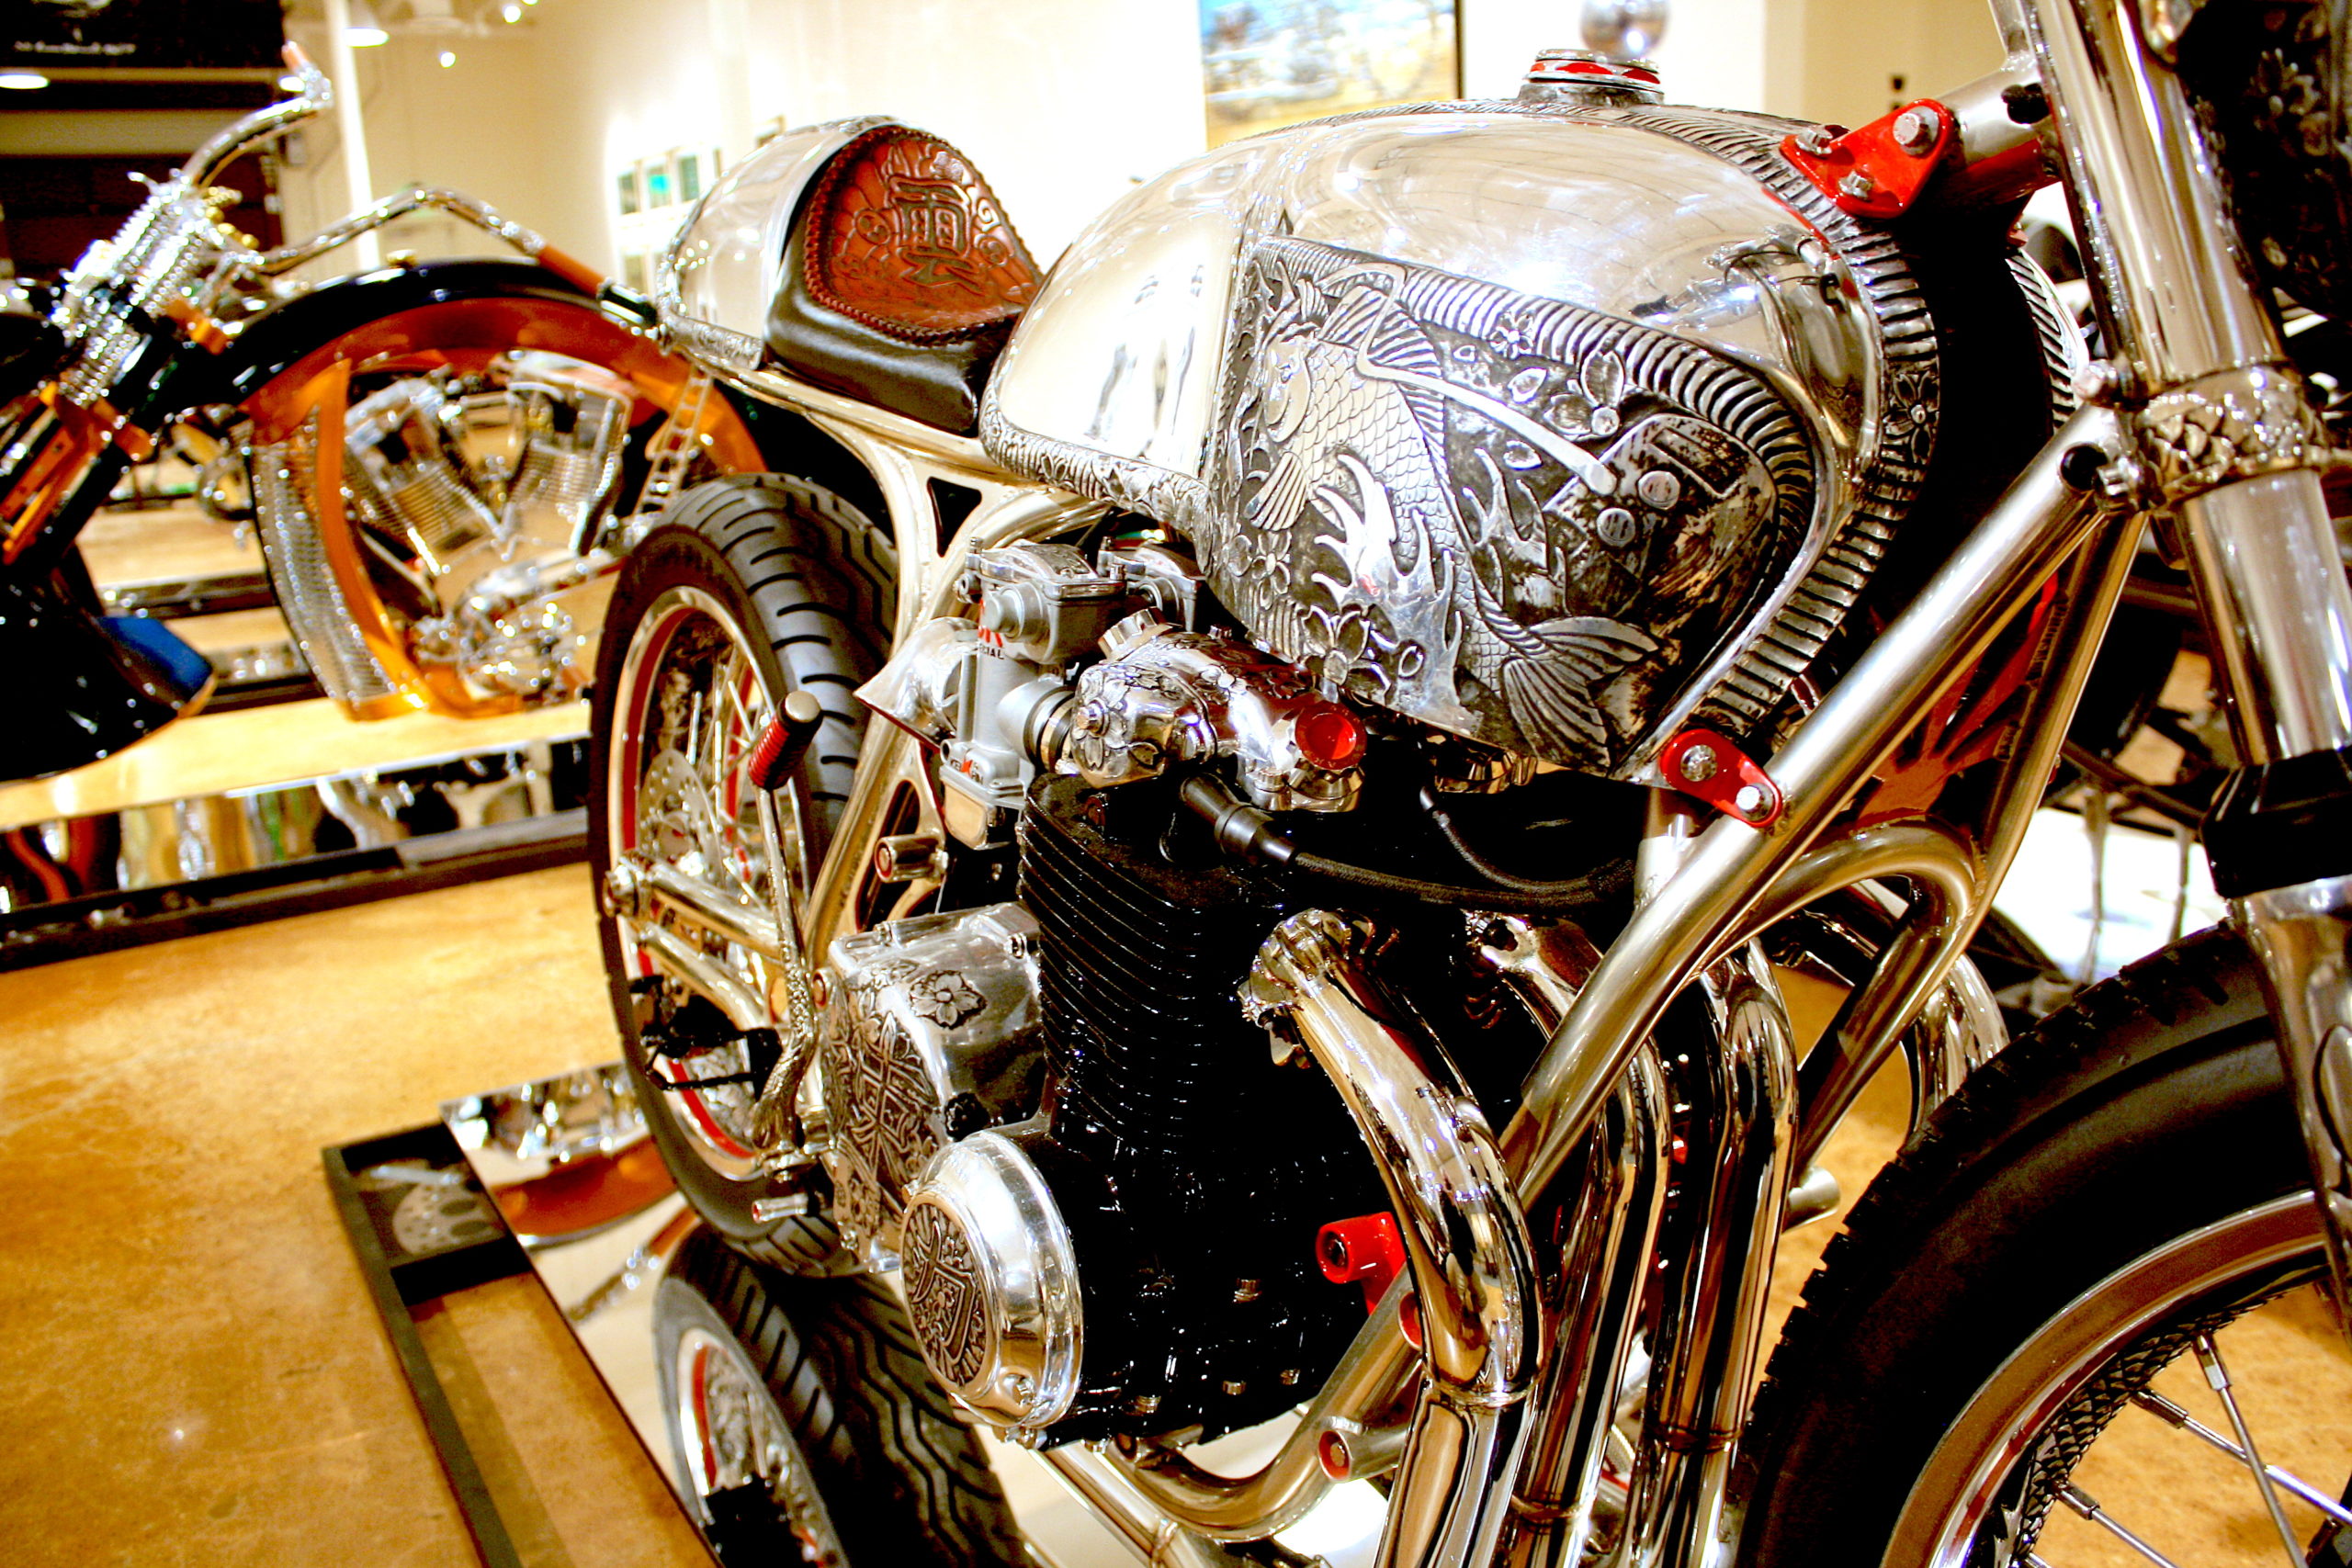 A close-up of a motorcycle in Haas's Moto Museum